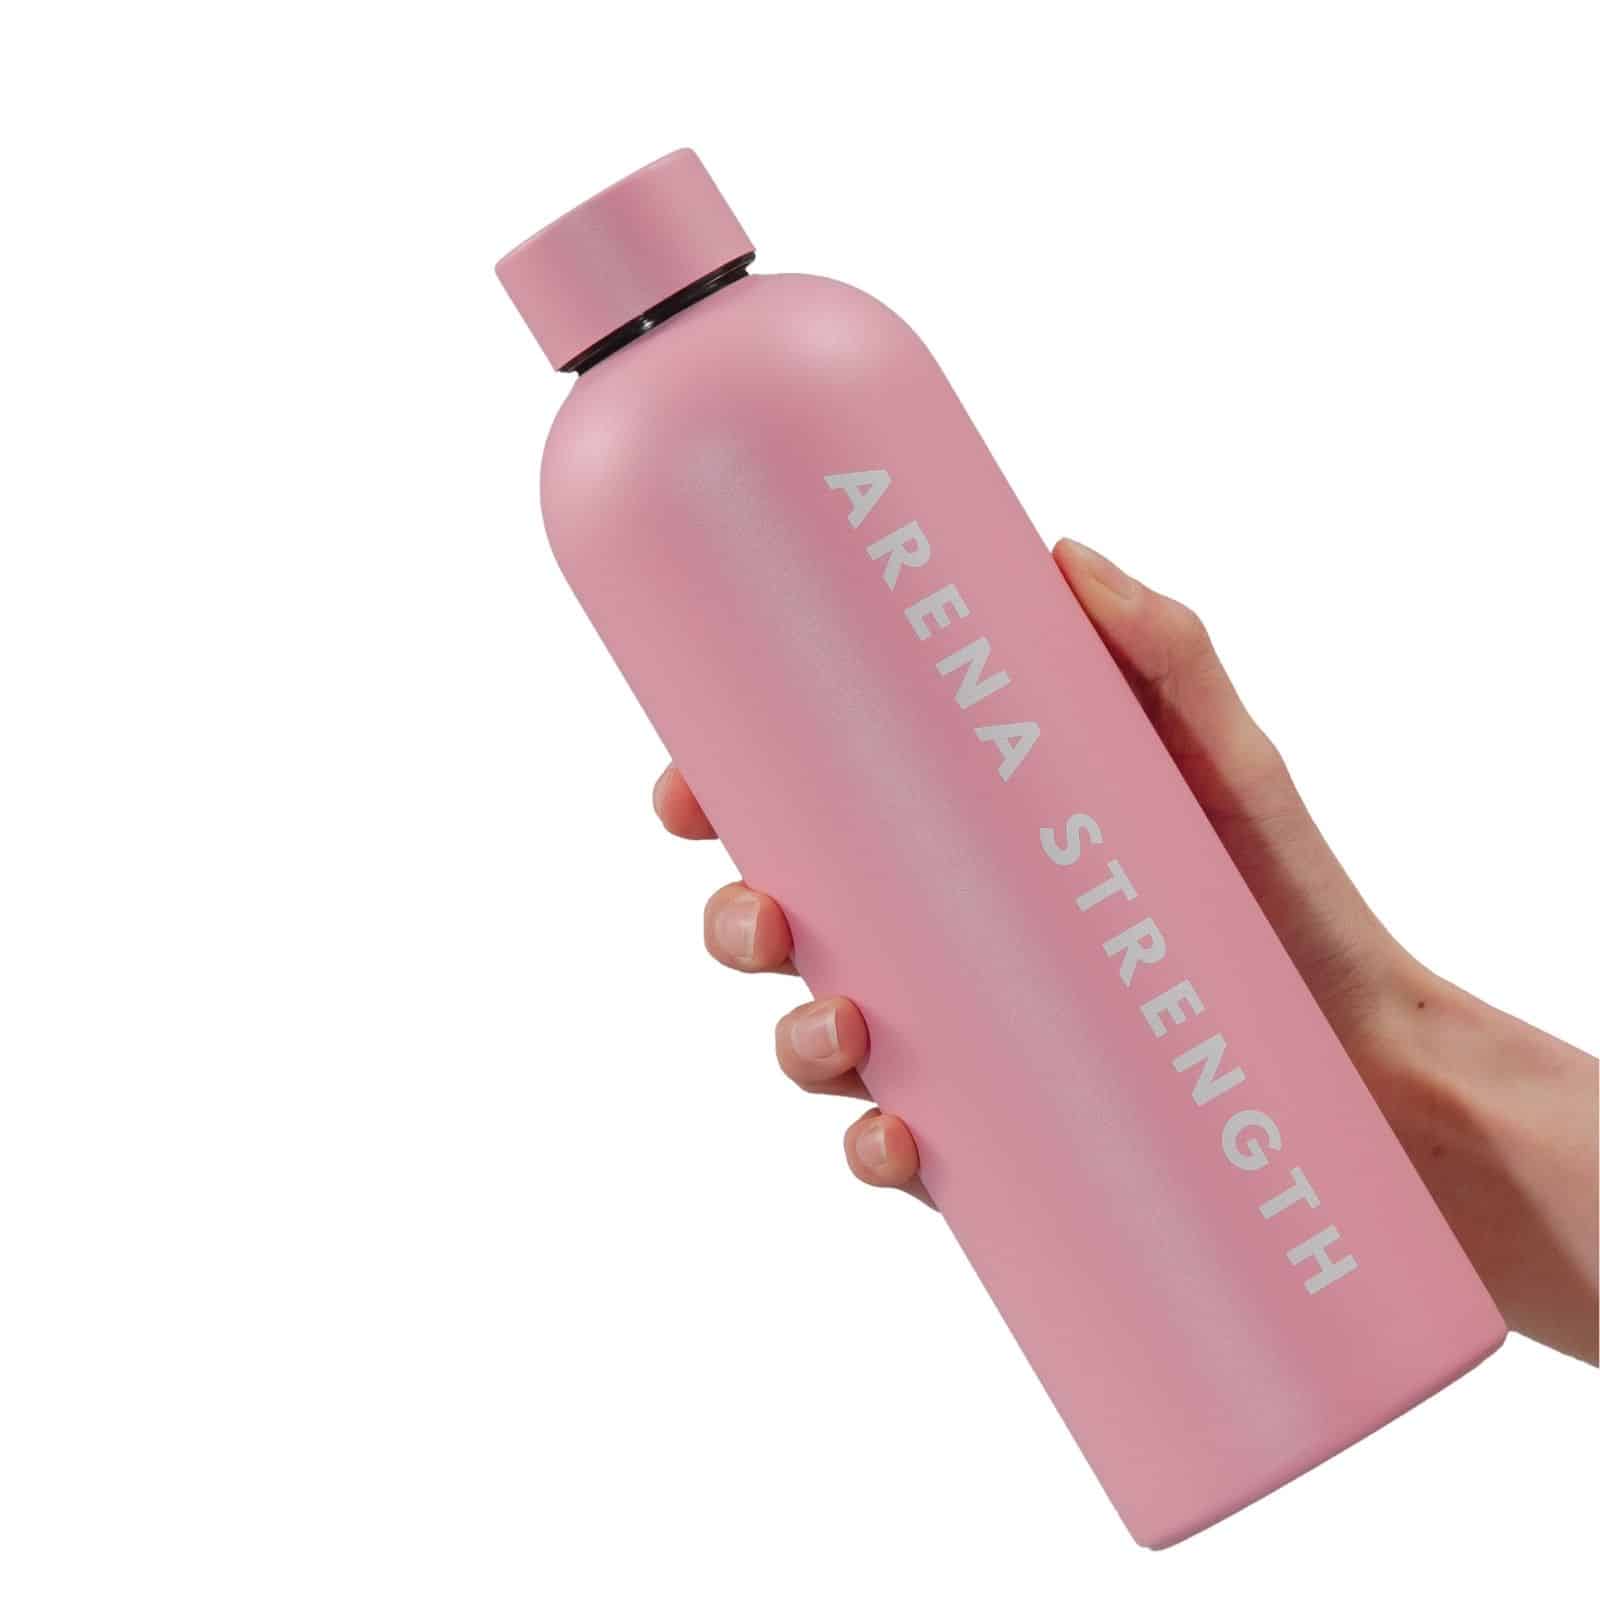 STAINLESS STEEL WATER BOTTLE - Arena Strength